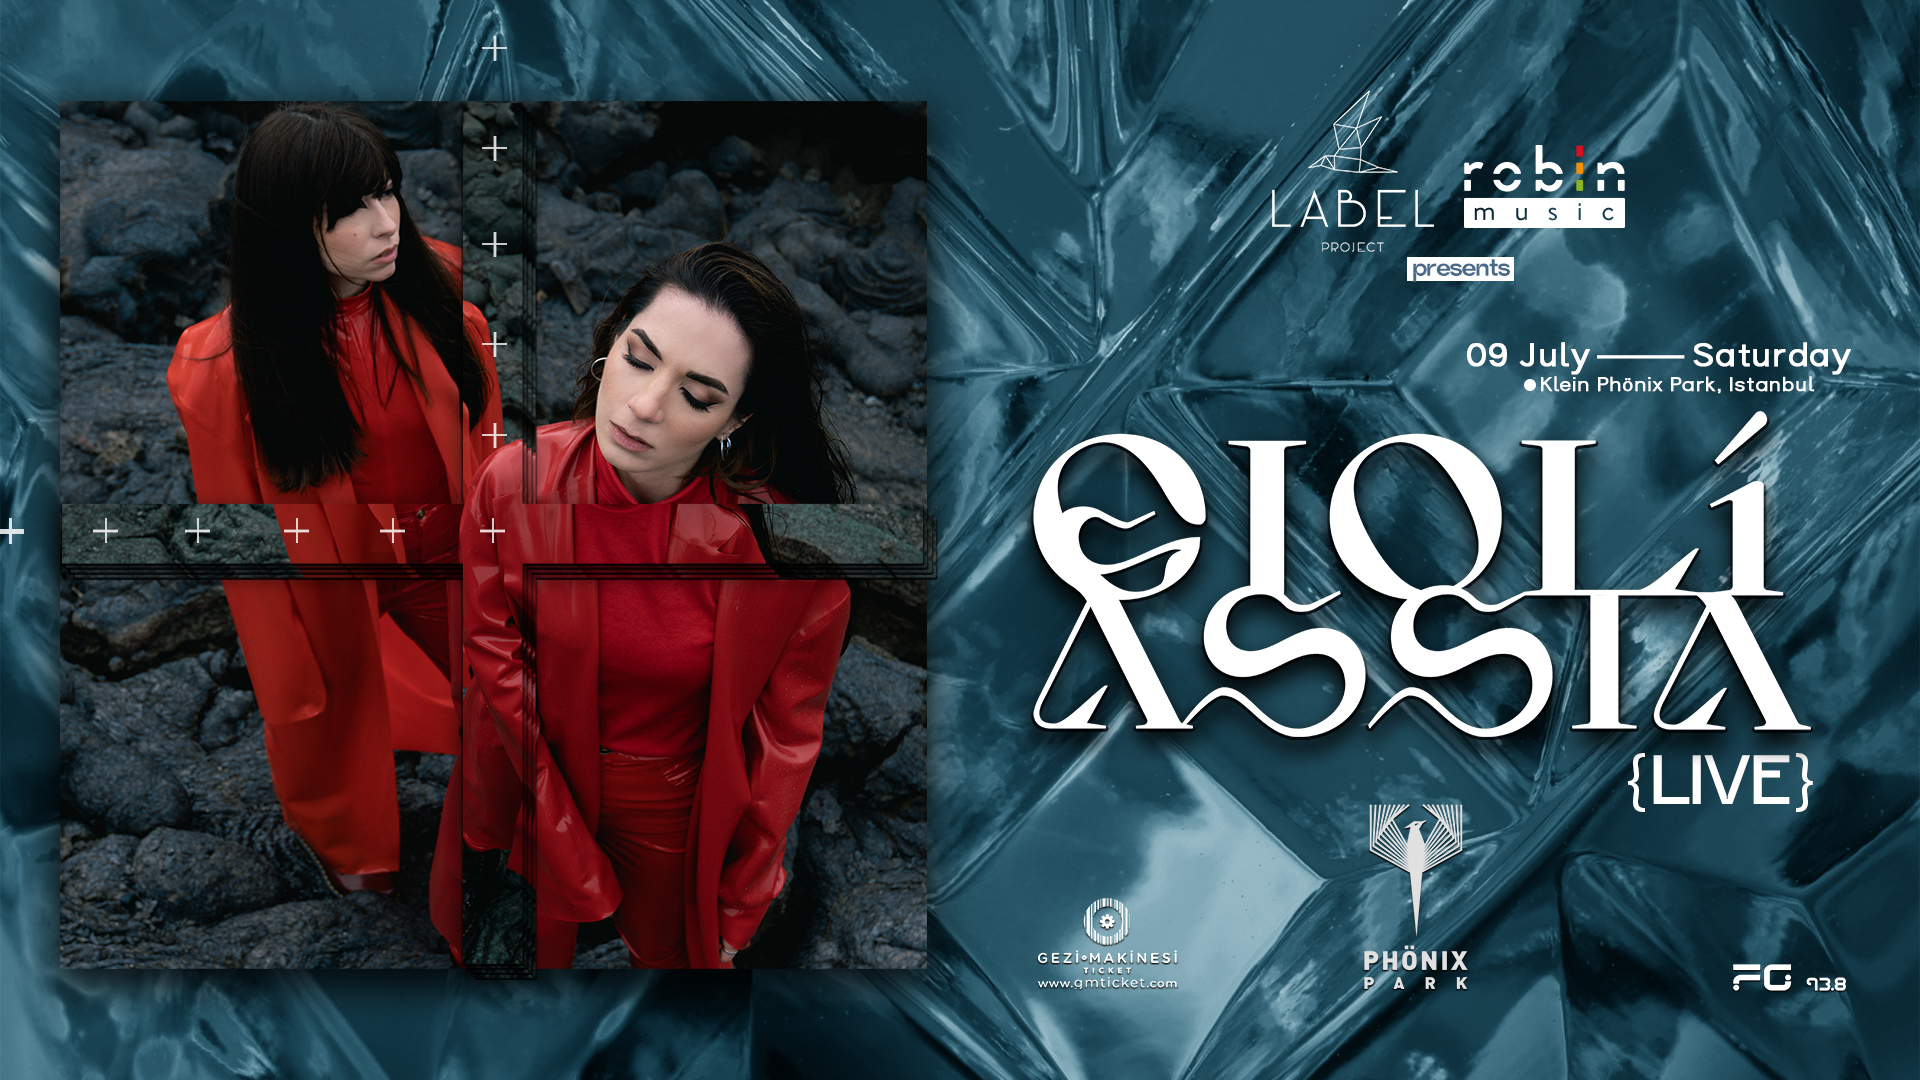 Label Project x Robin Music Agency presents - Gioli & Assia Istanbul - Flyer front